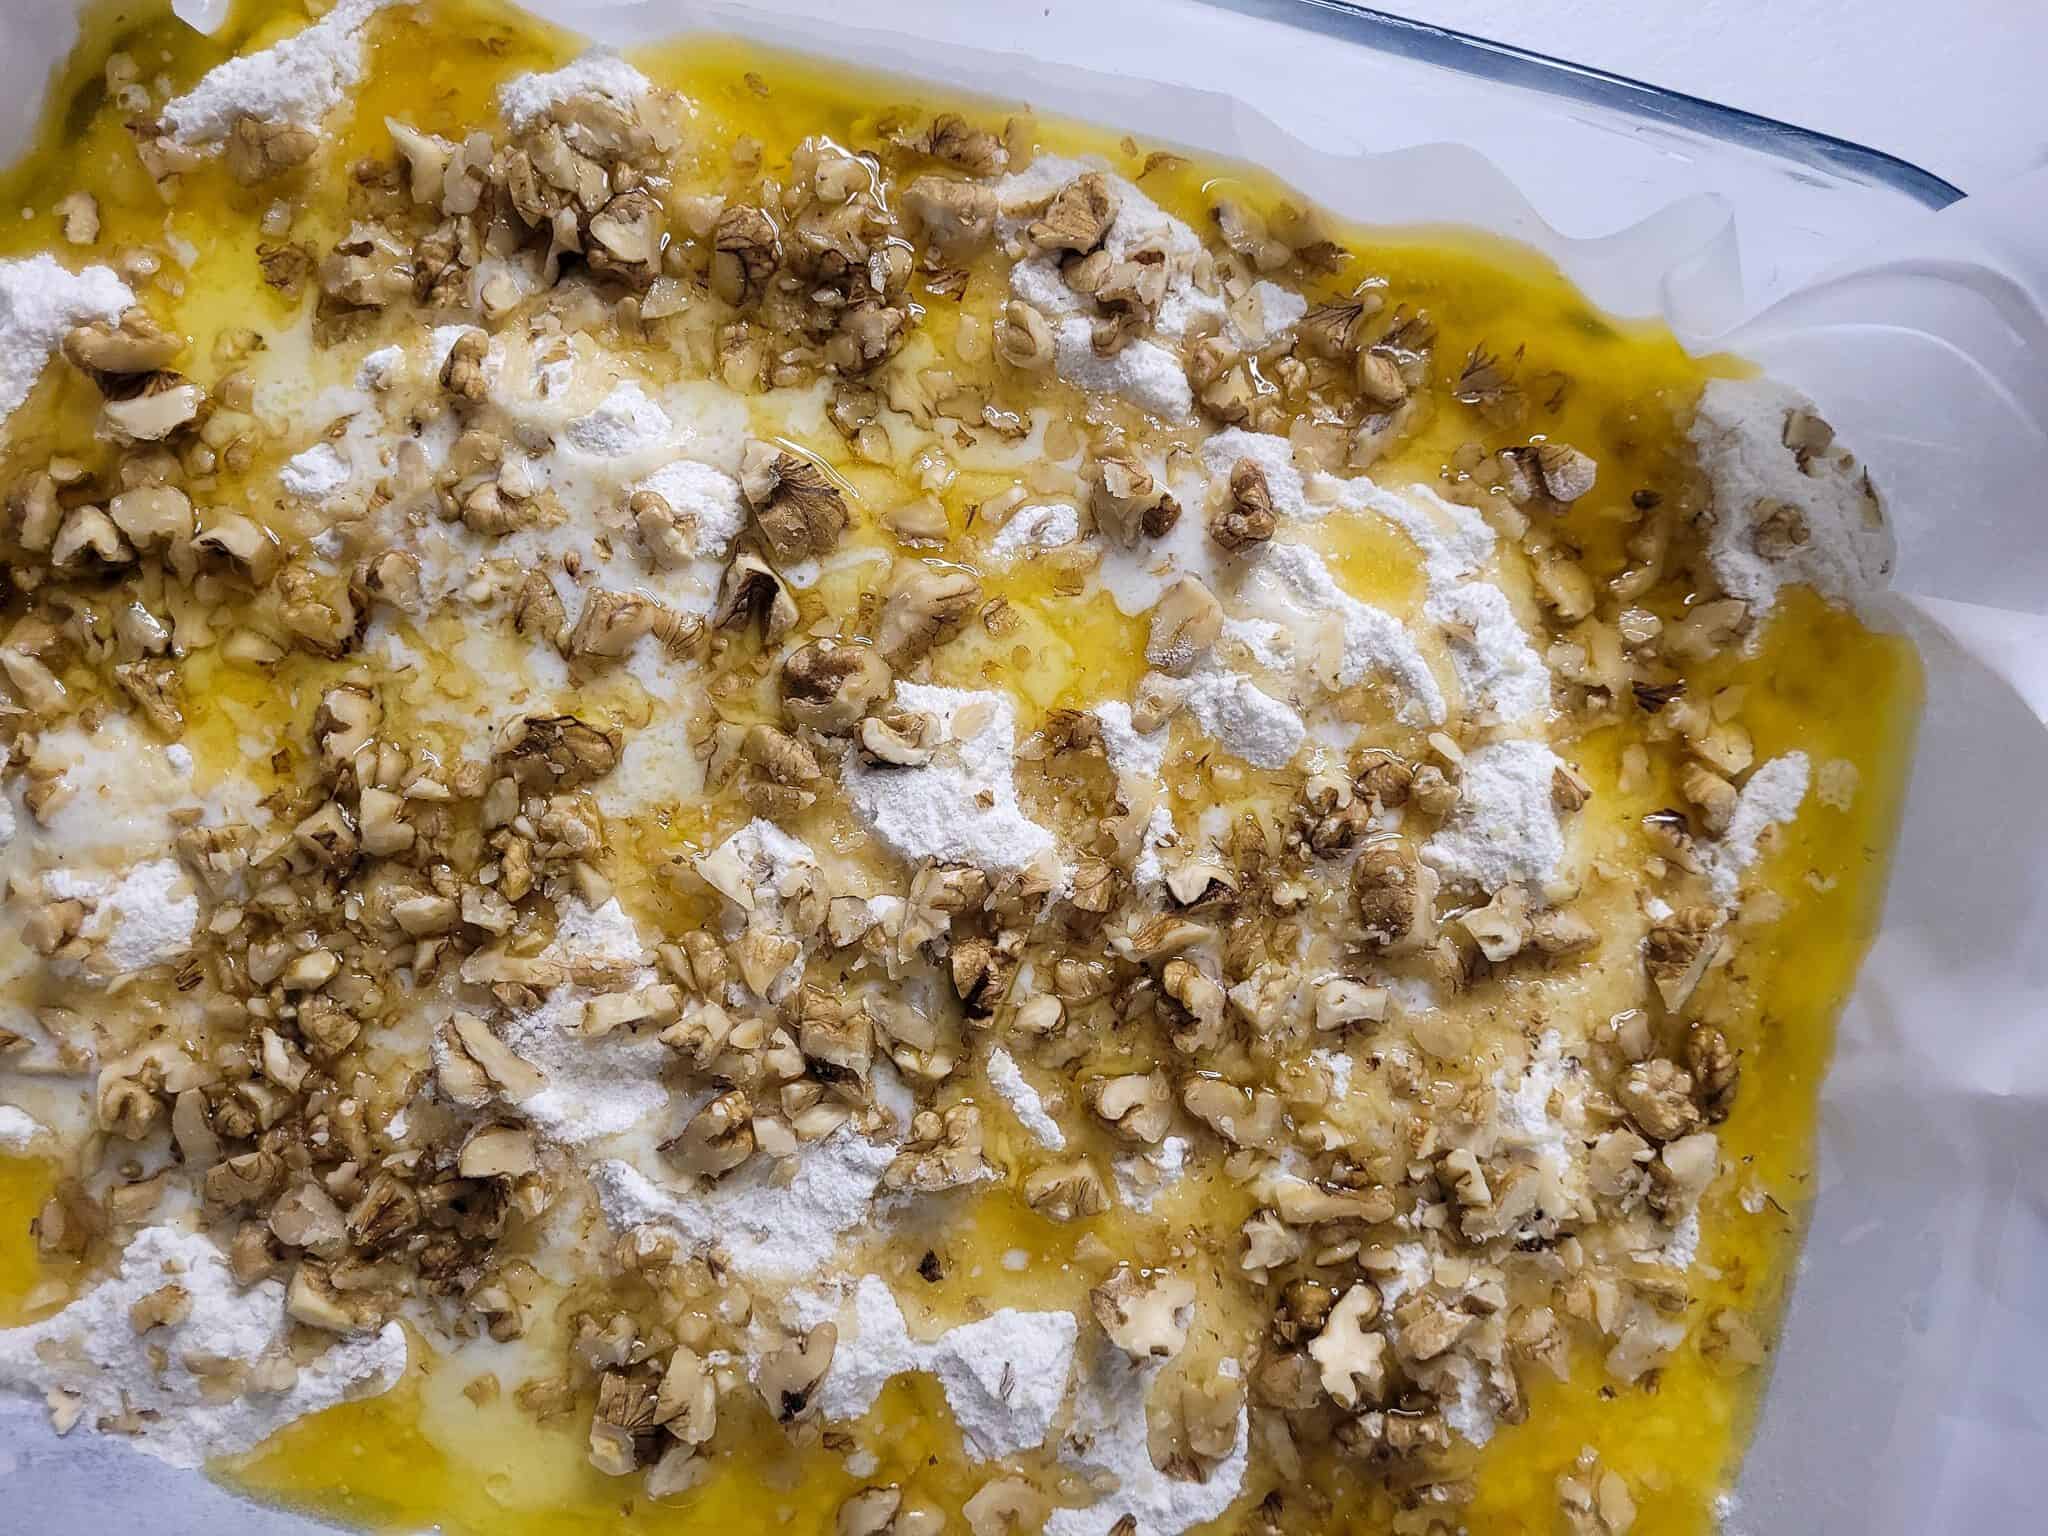 Melted butter with chopped nuts on top of dry cake mix in glass baking dish